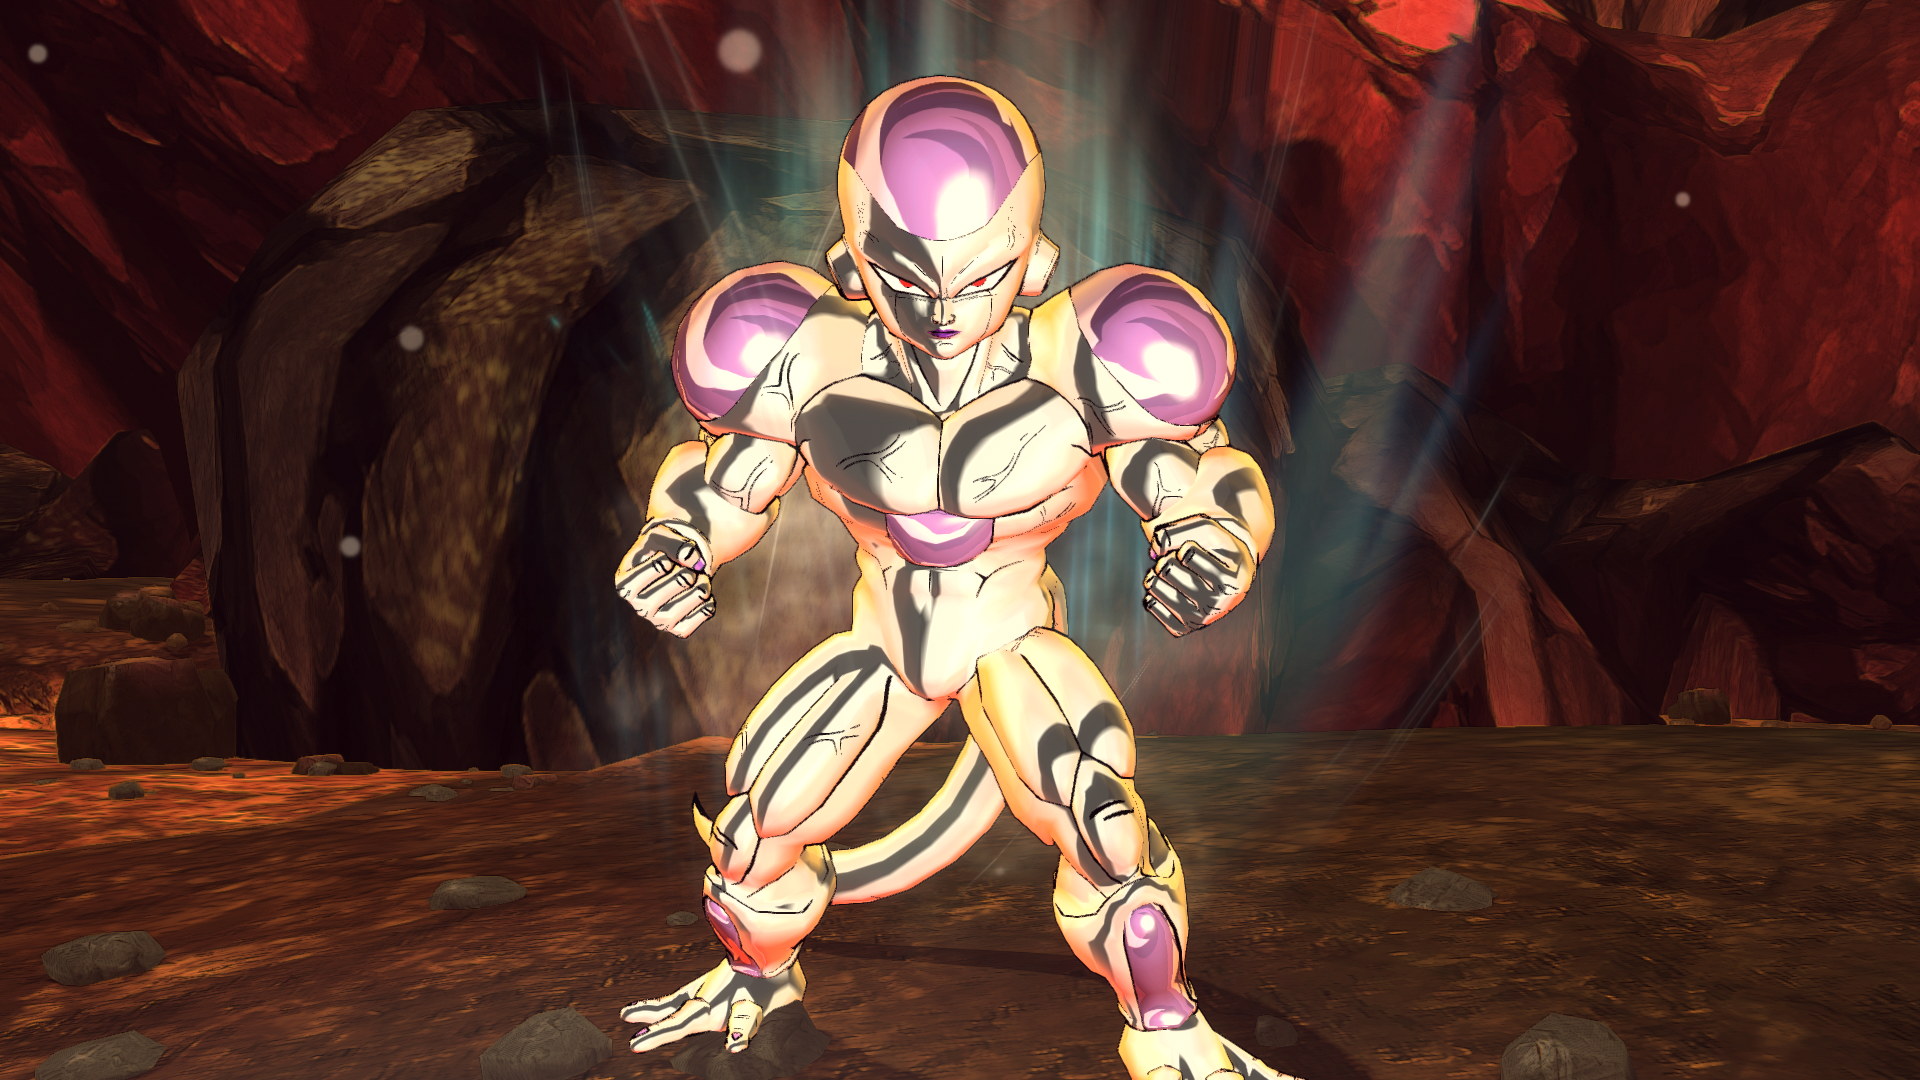 Frieza/Freezer 4th Form 100% with custom combos